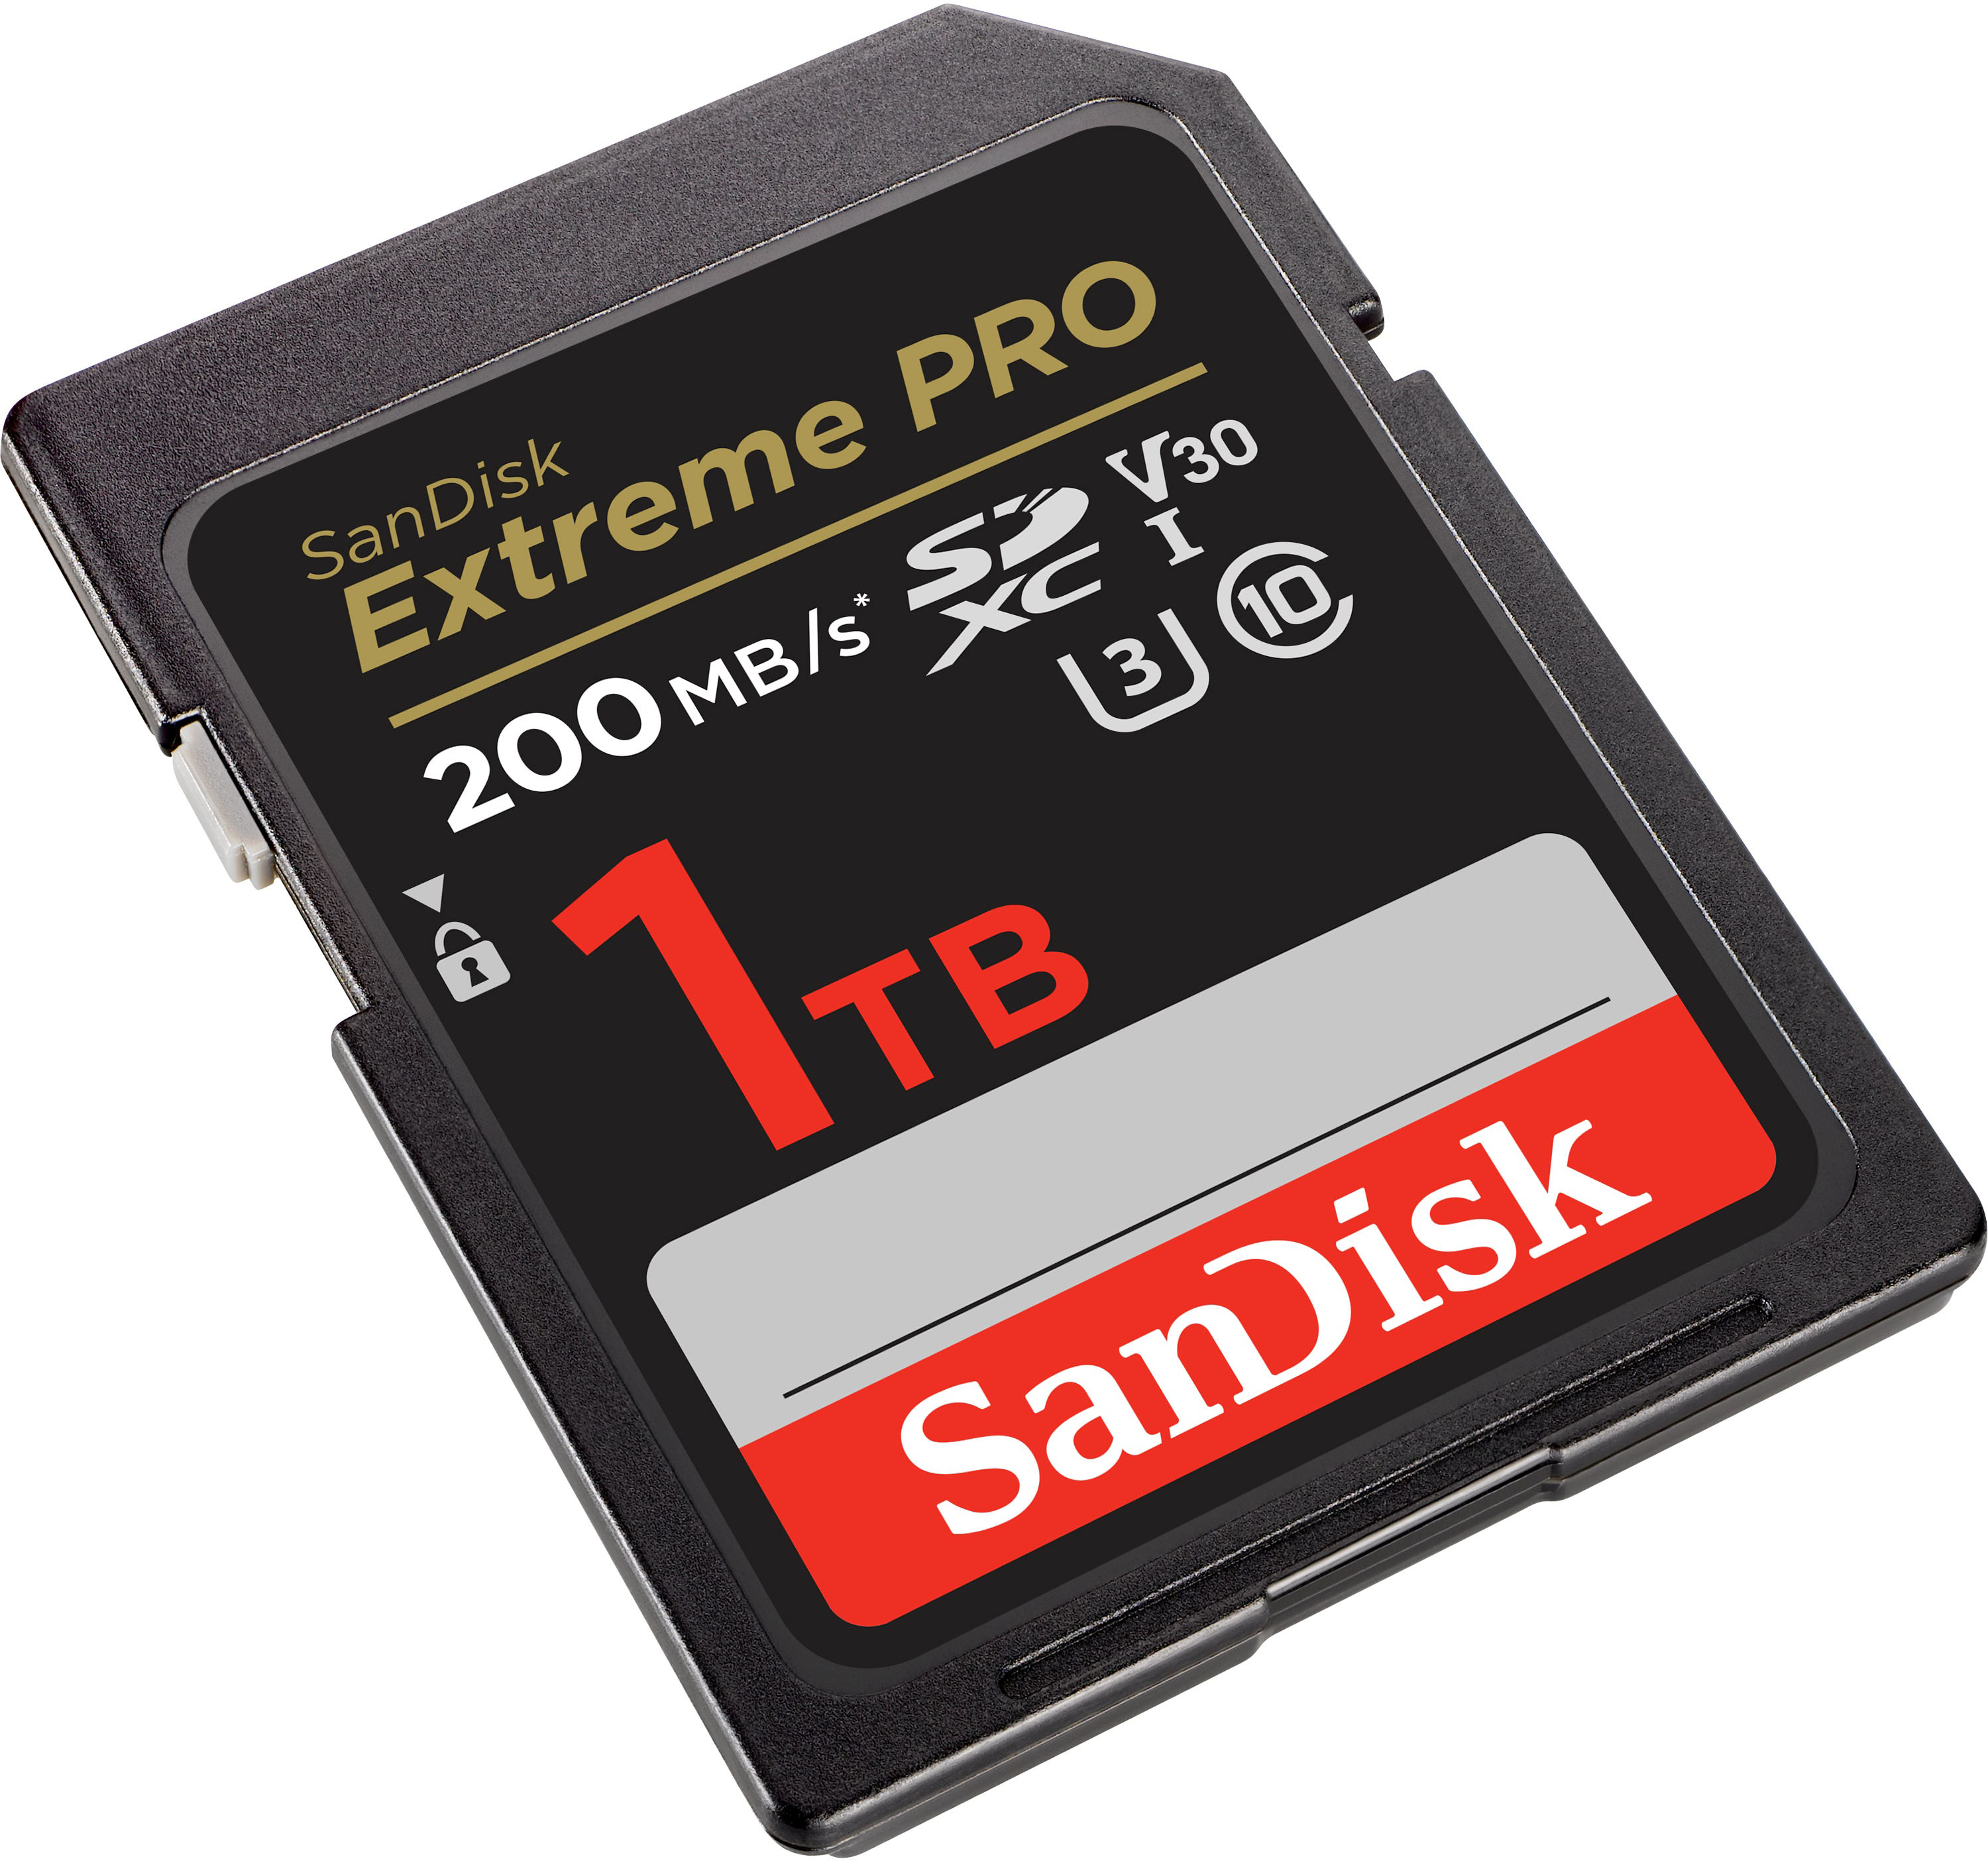 1TB microSD cards are here and I irrationally want one